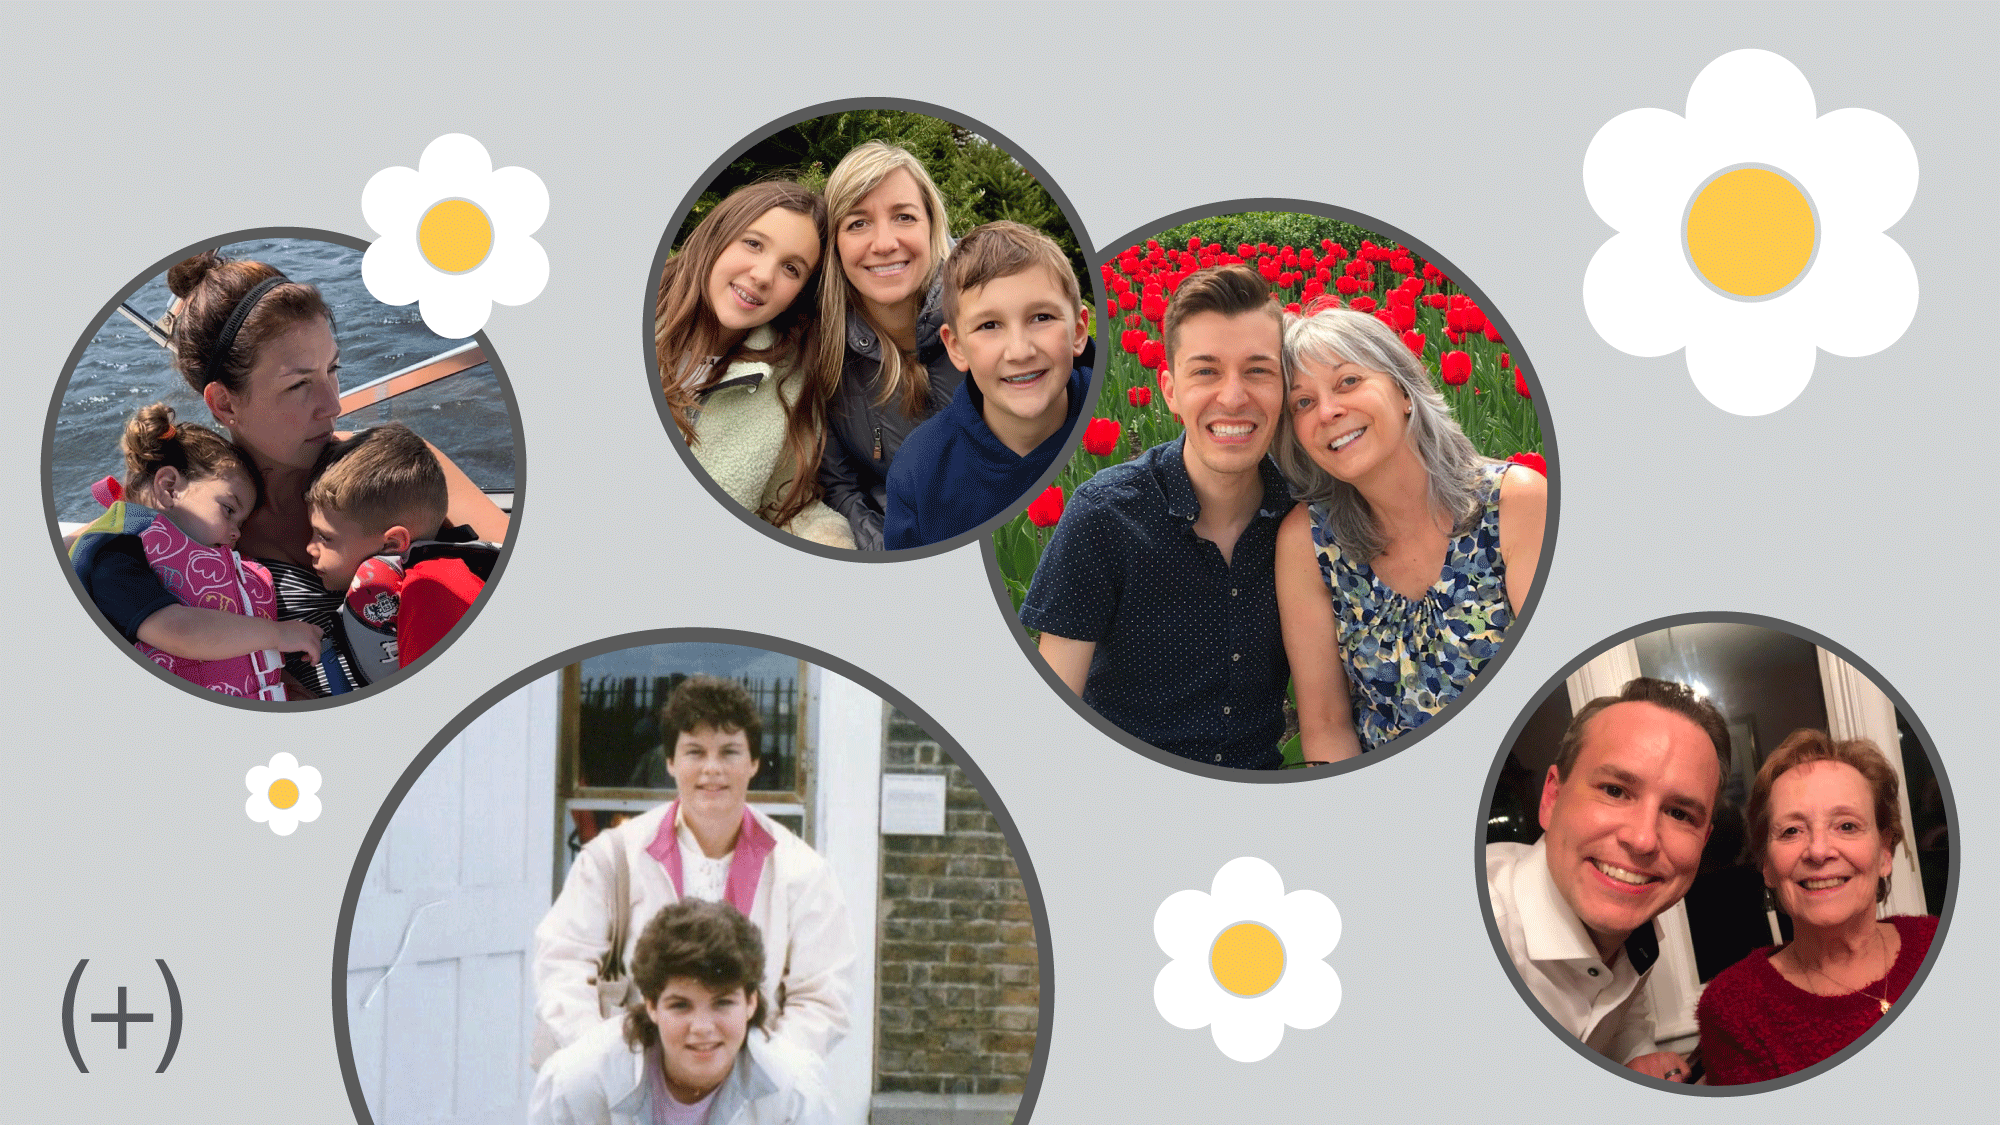 Multiple circular photos of families and individuals with decorative floral icons, celebrating Mother's Day.